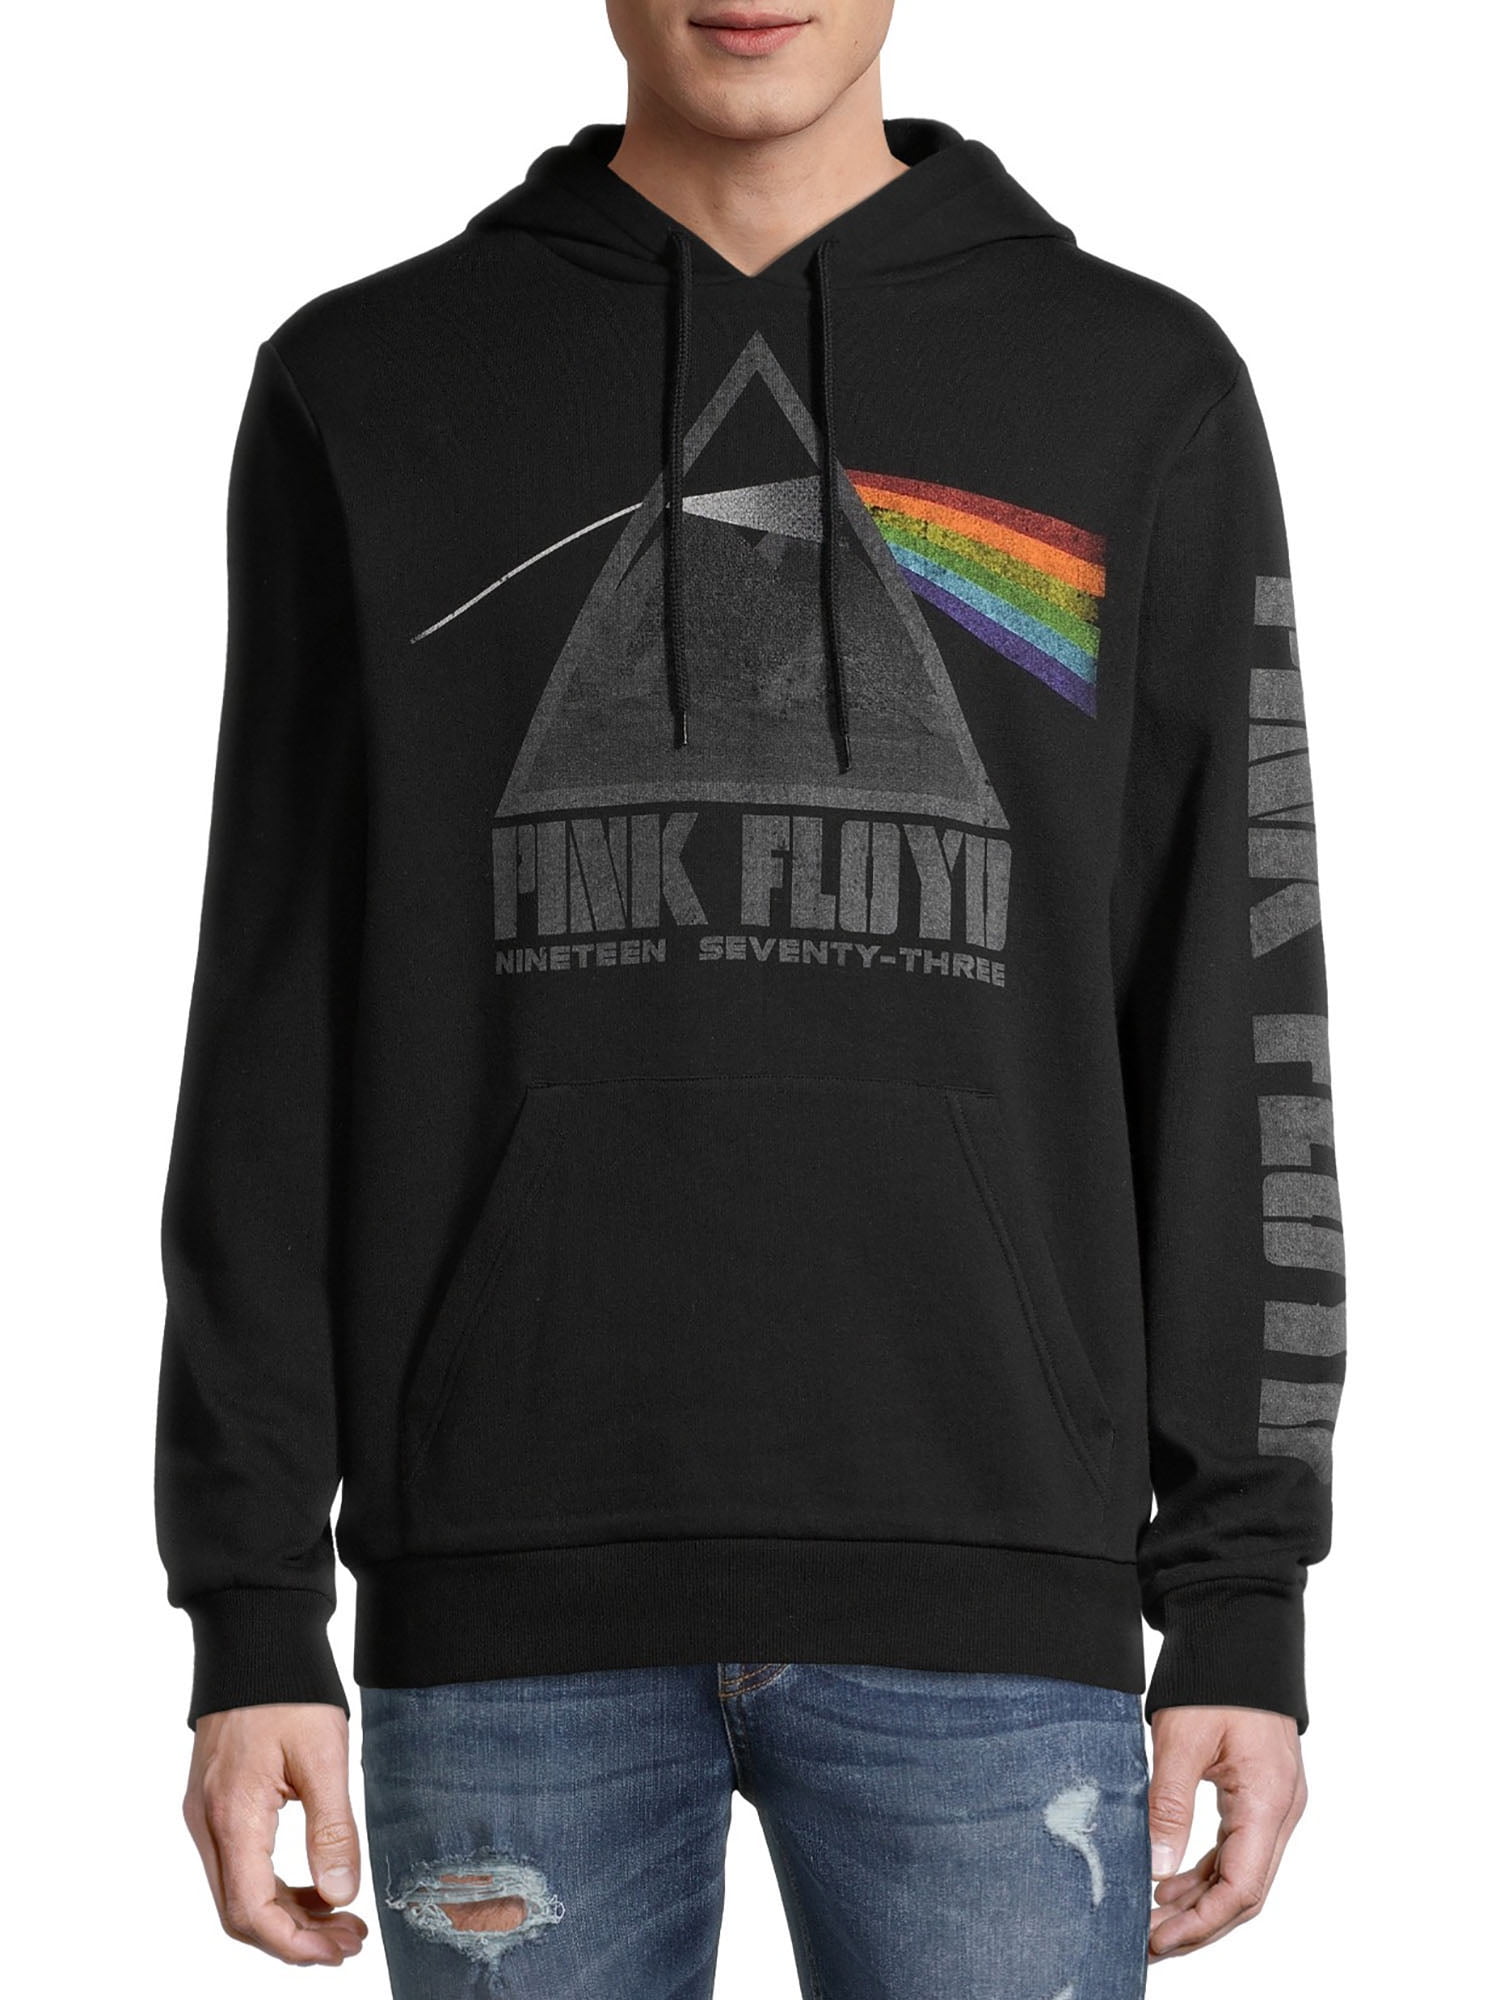 Absolute Cult Pink Floyd Homme Chalk Prism Sweat-Shirt 